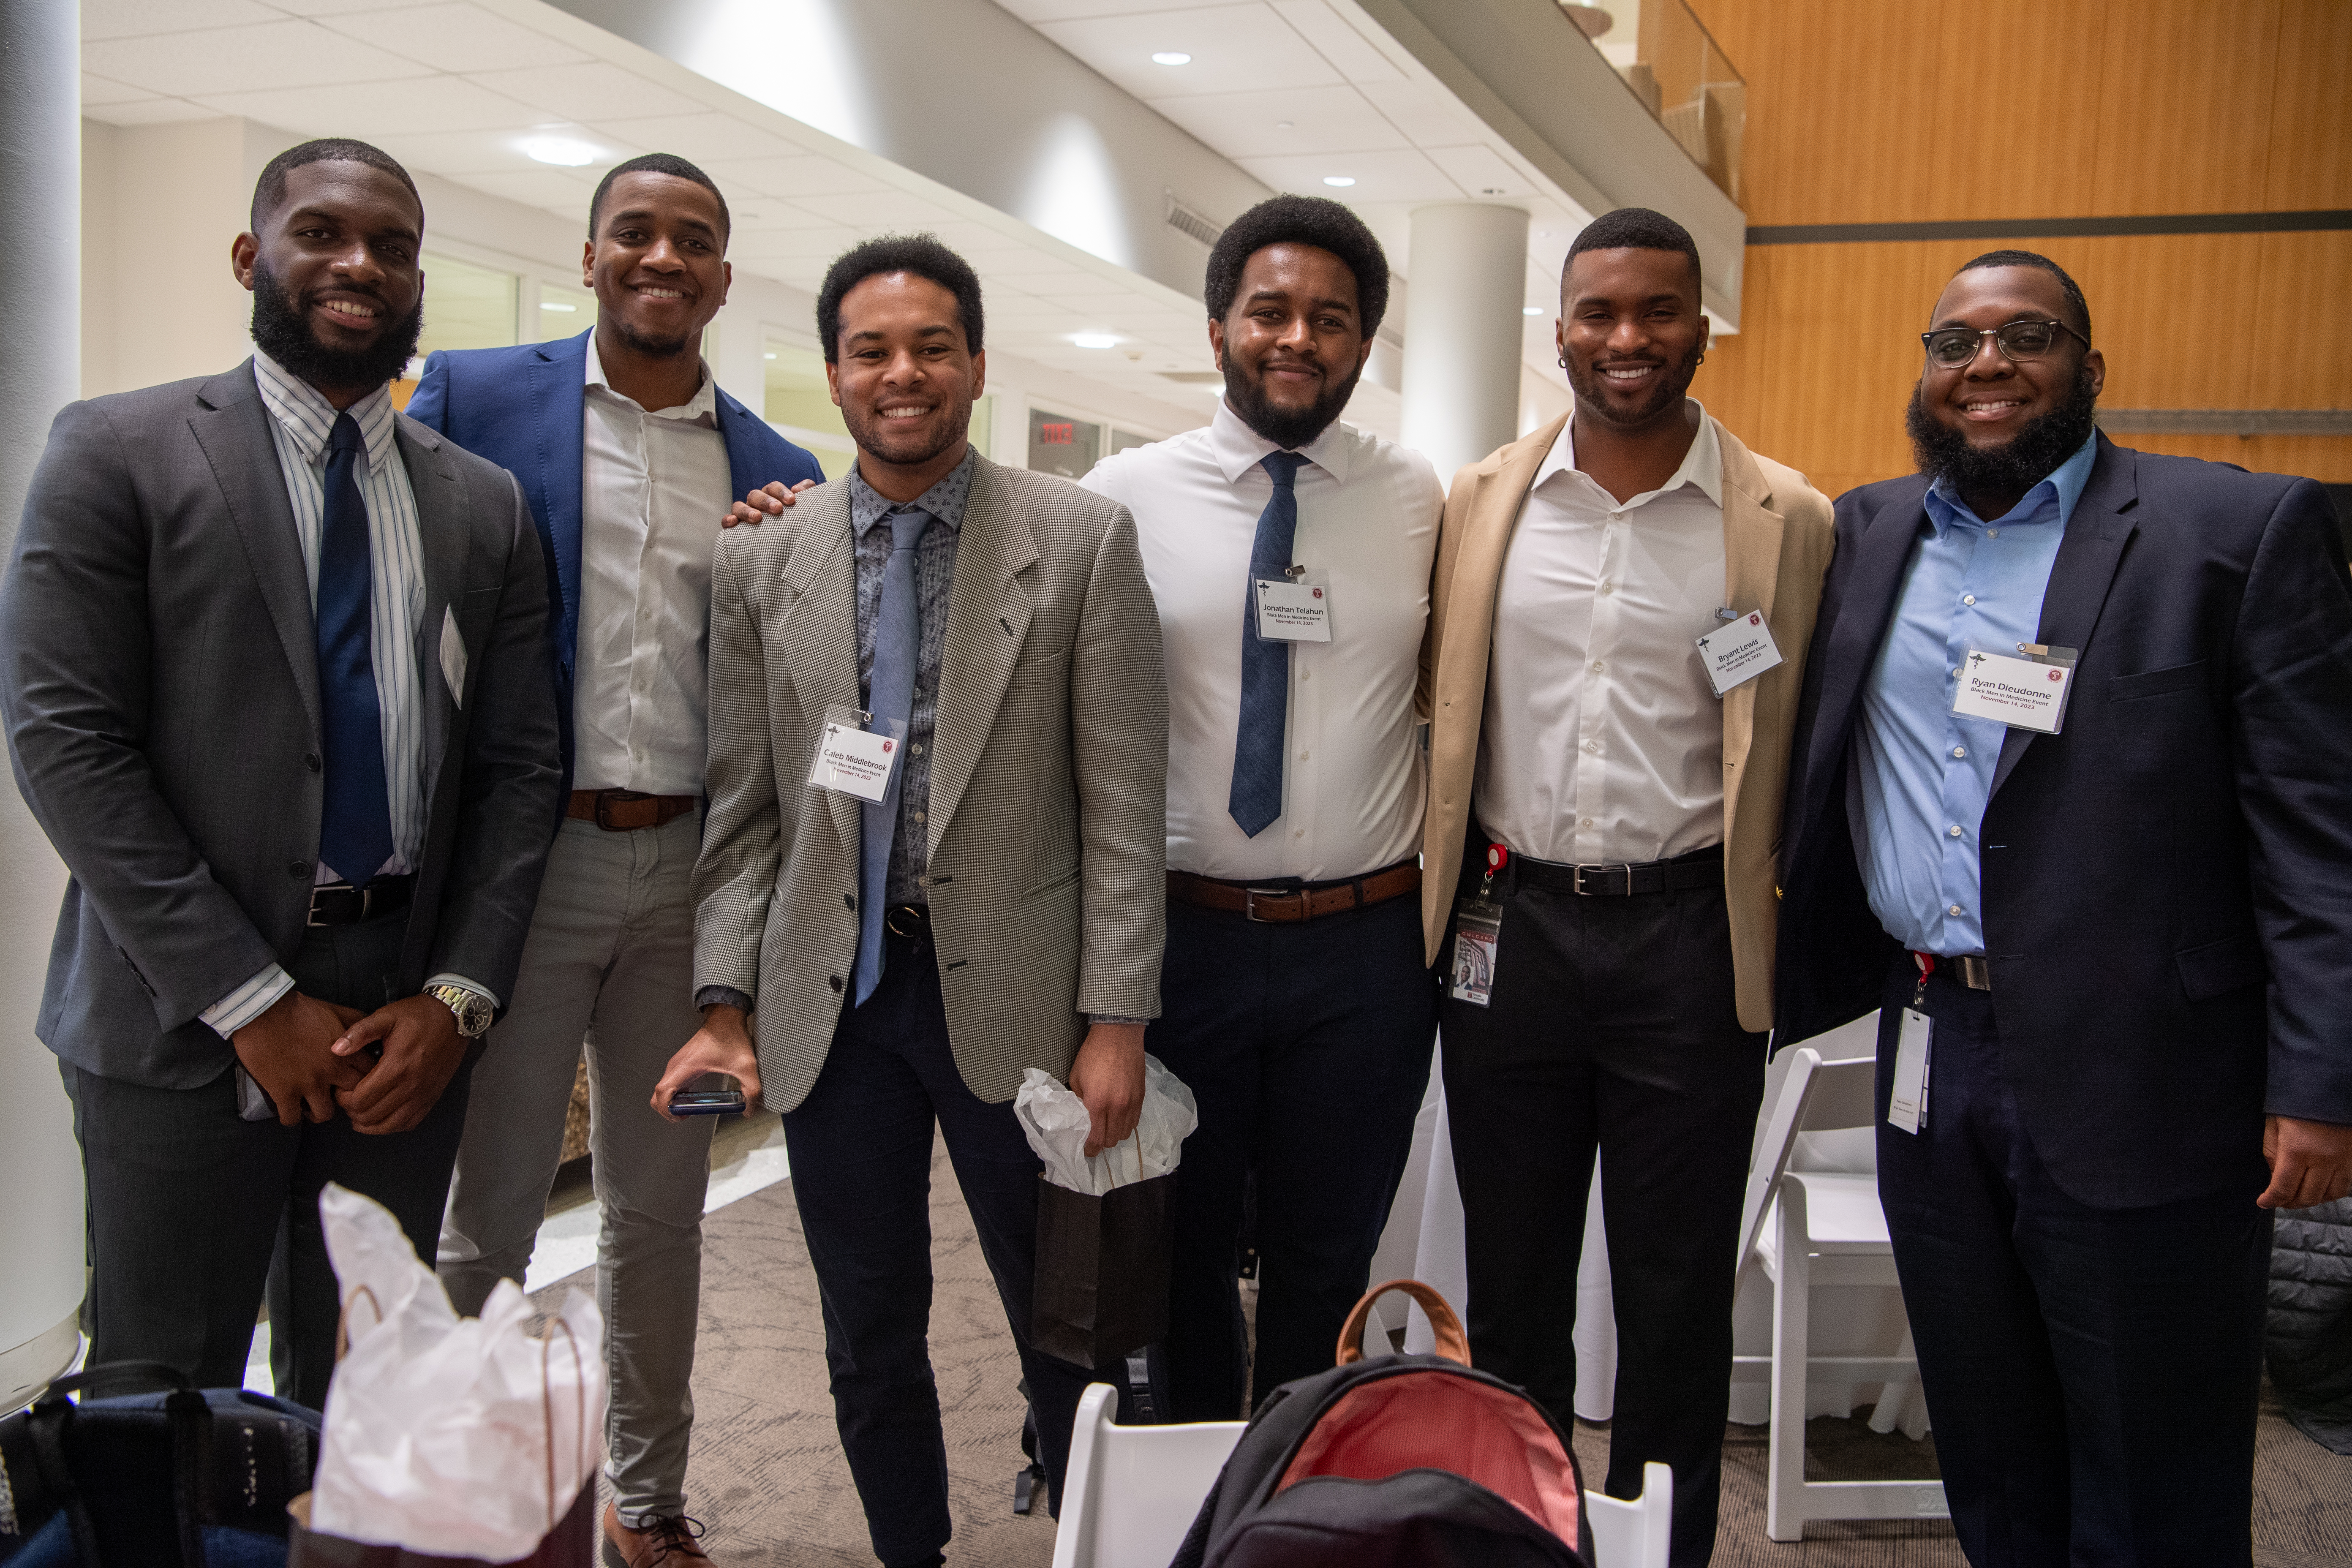 Attendees at the Black Men in Medicine Conference